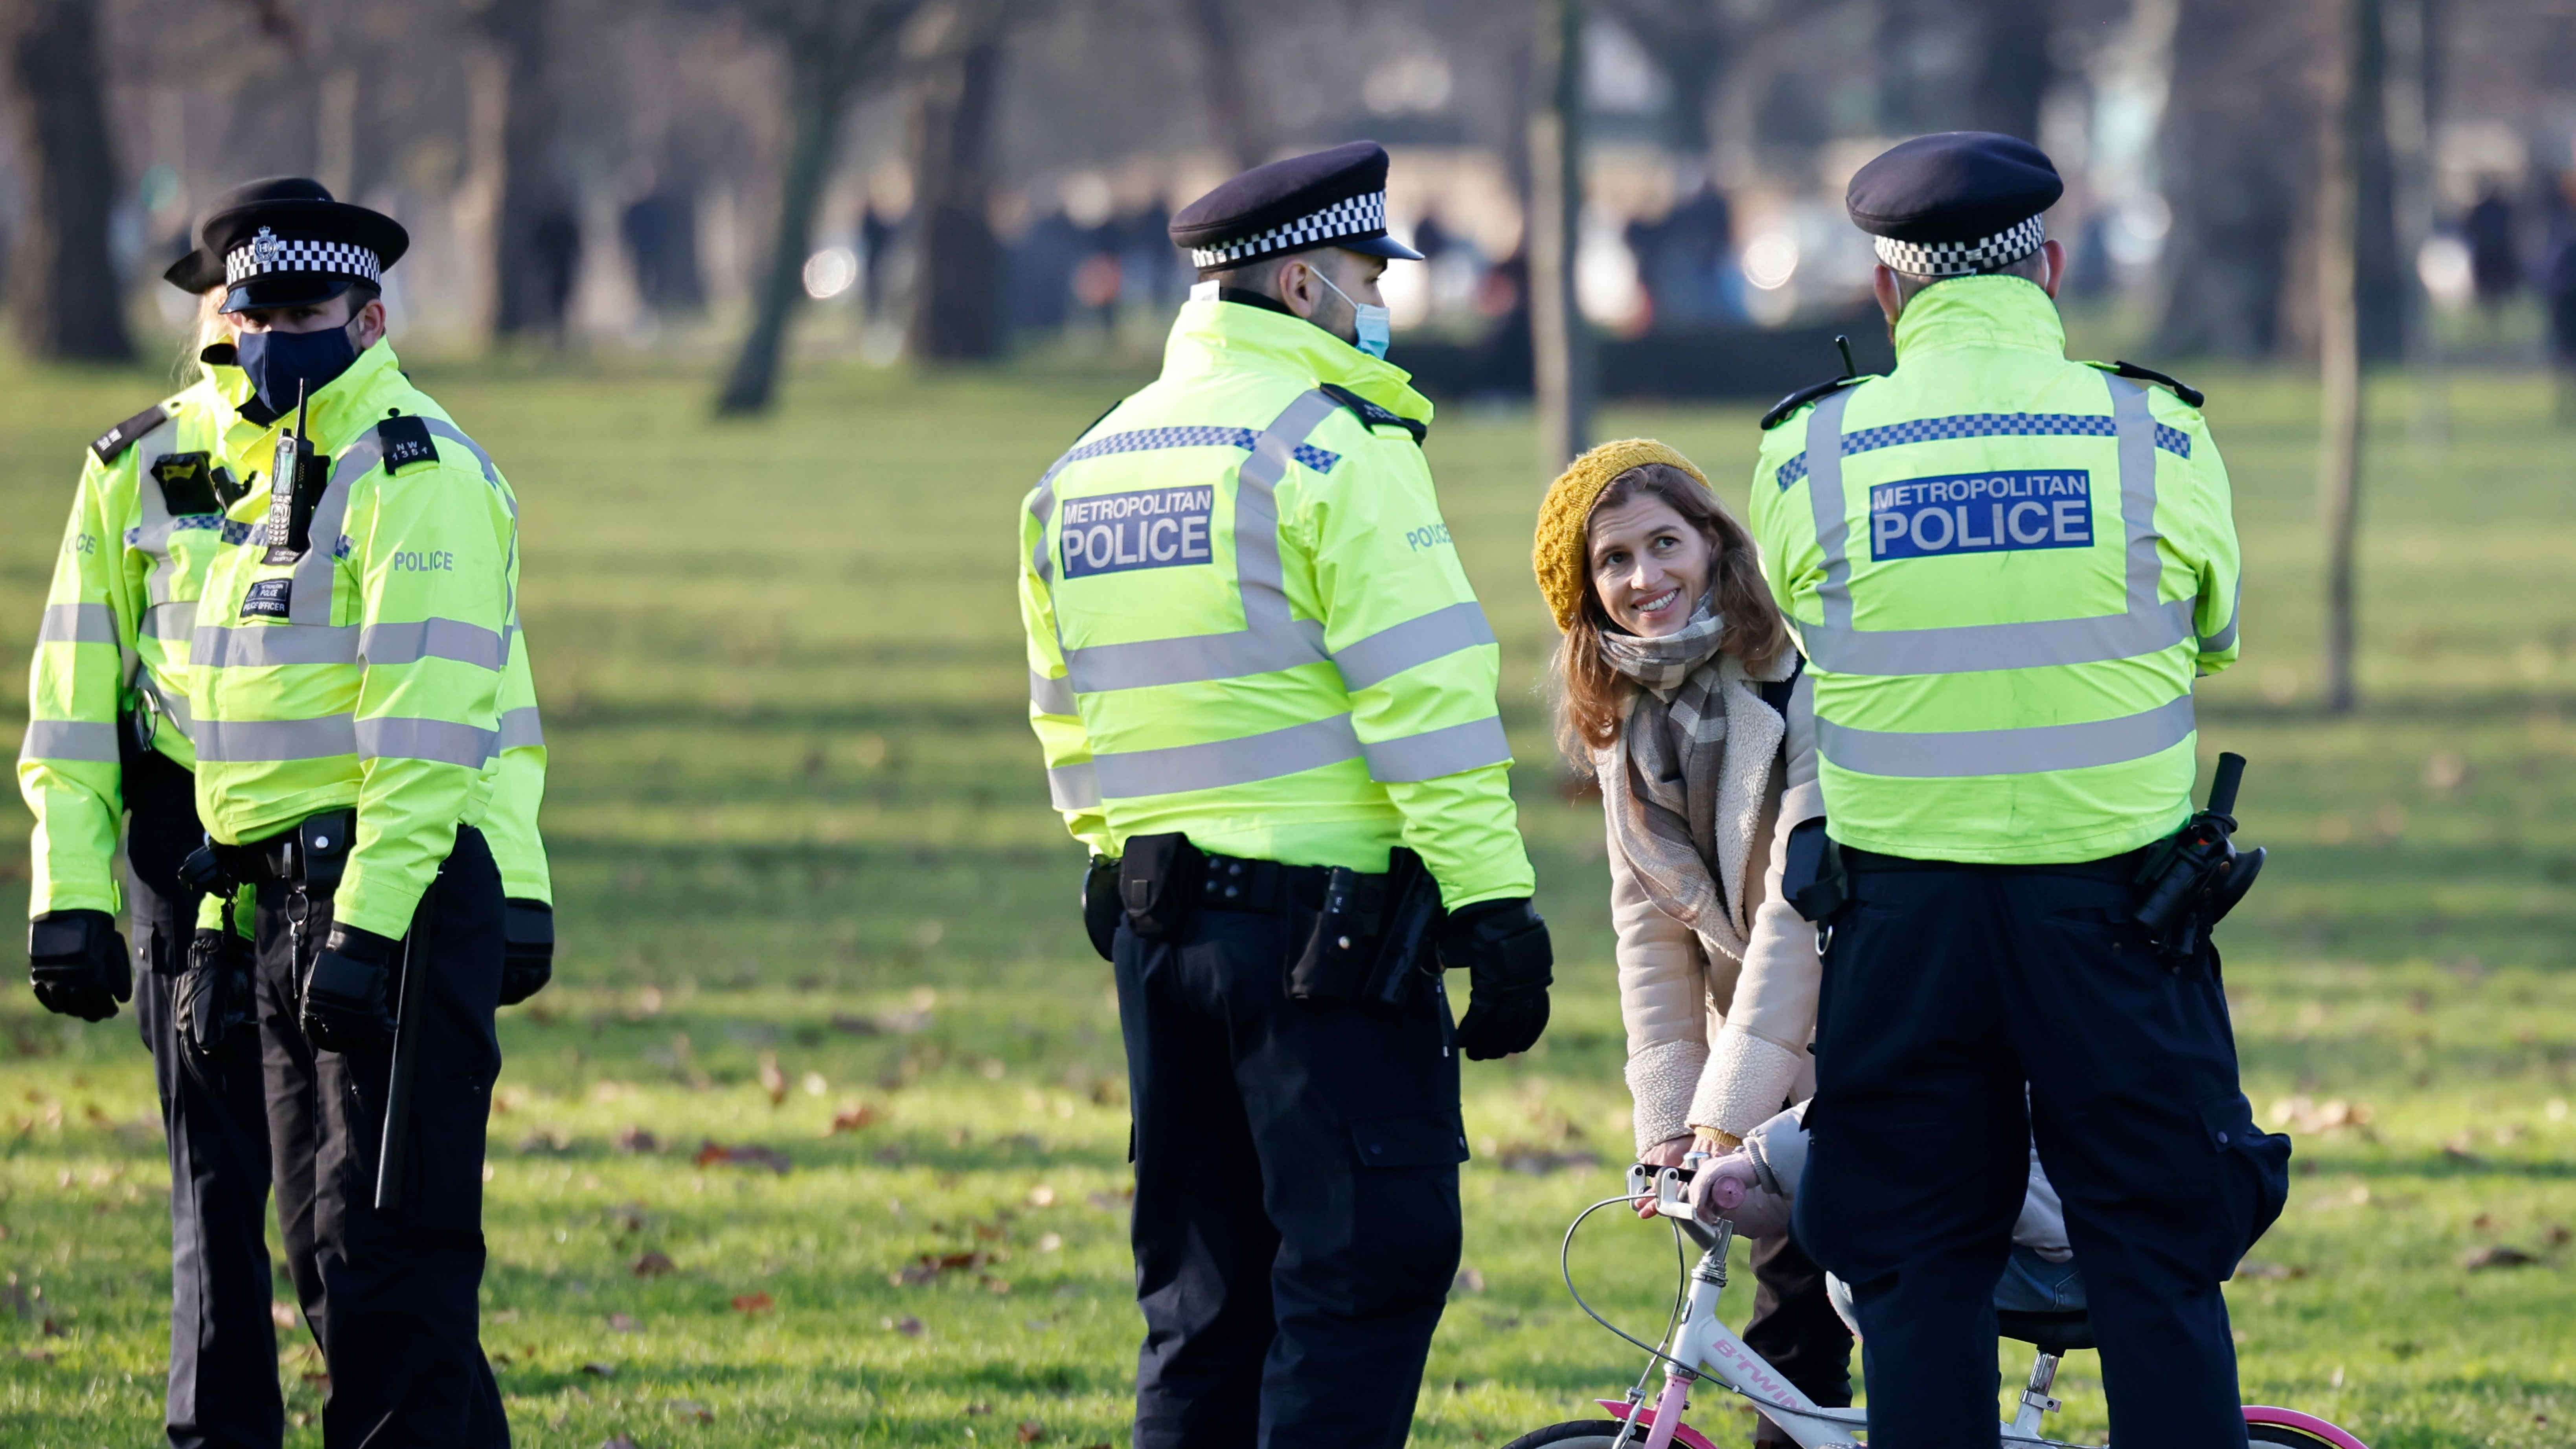 Police officers talk with a family as they patrol in Clapham Common, south London.